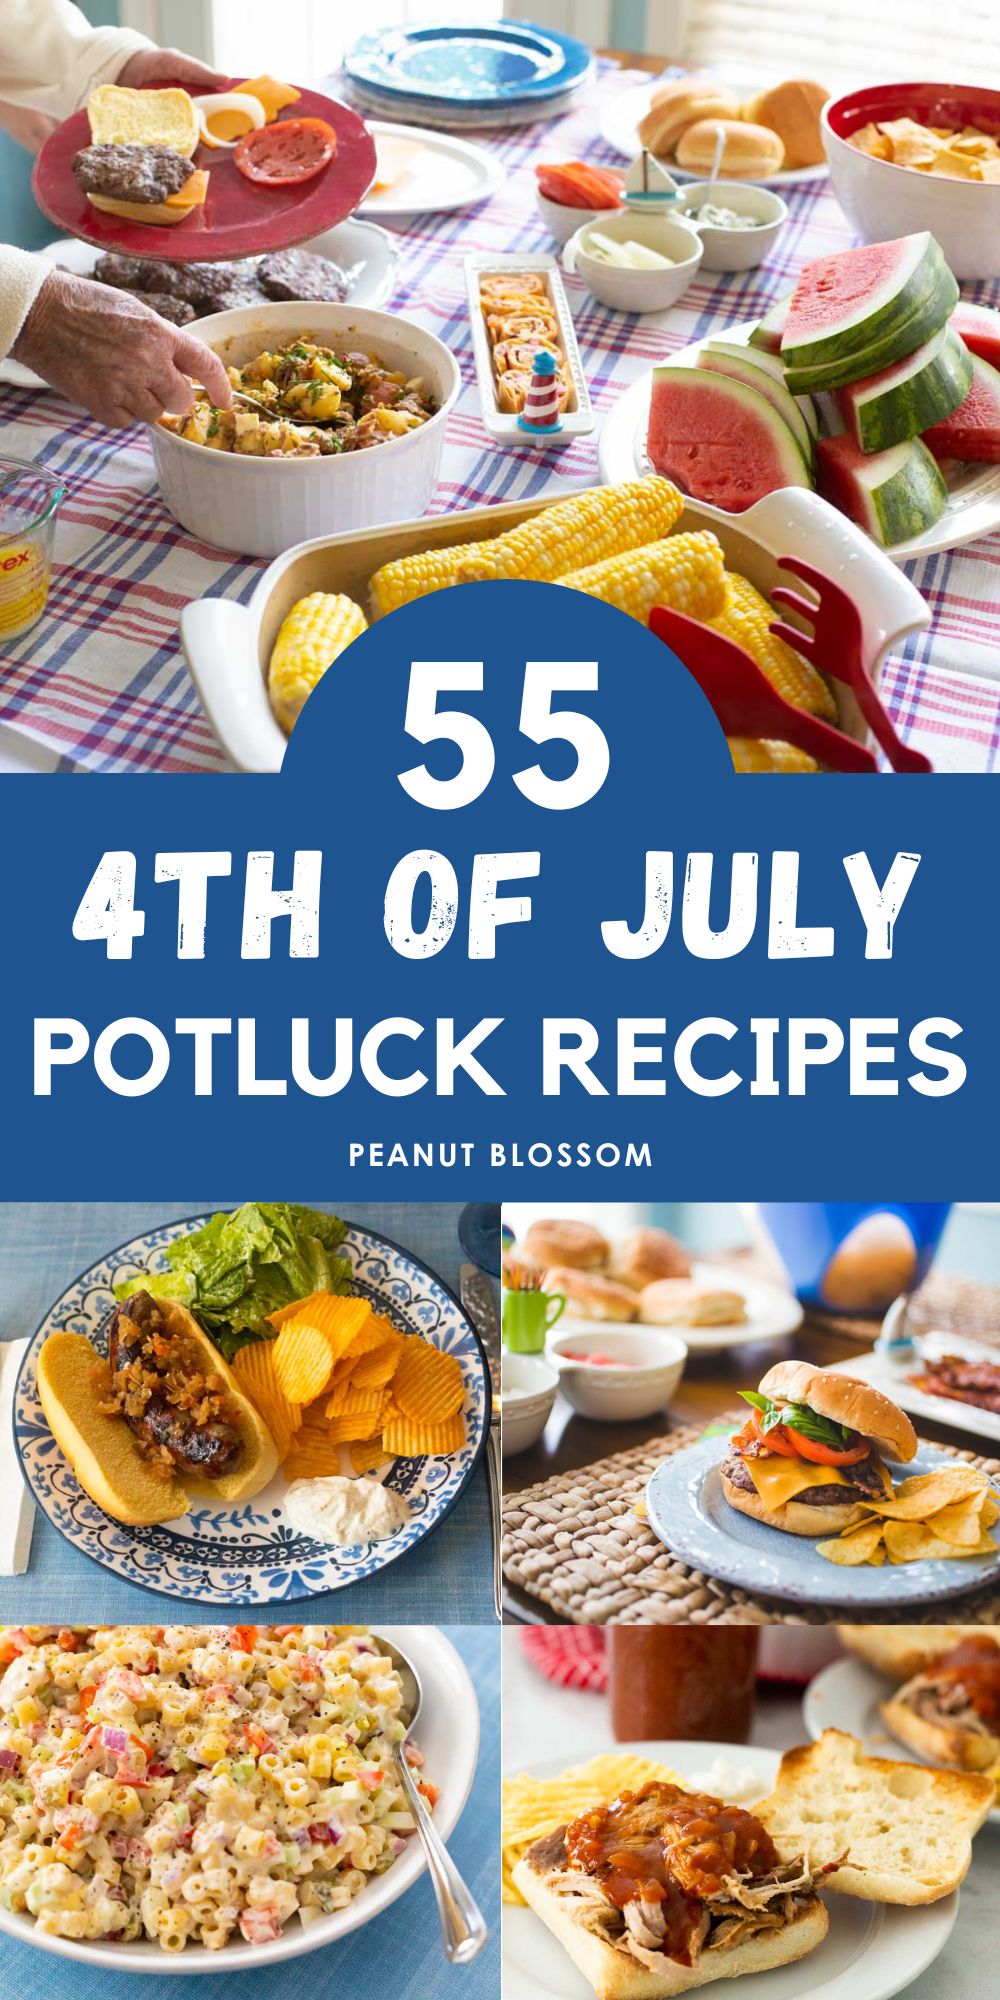 The photo collage shows several recipes for a 4th of July potluck.